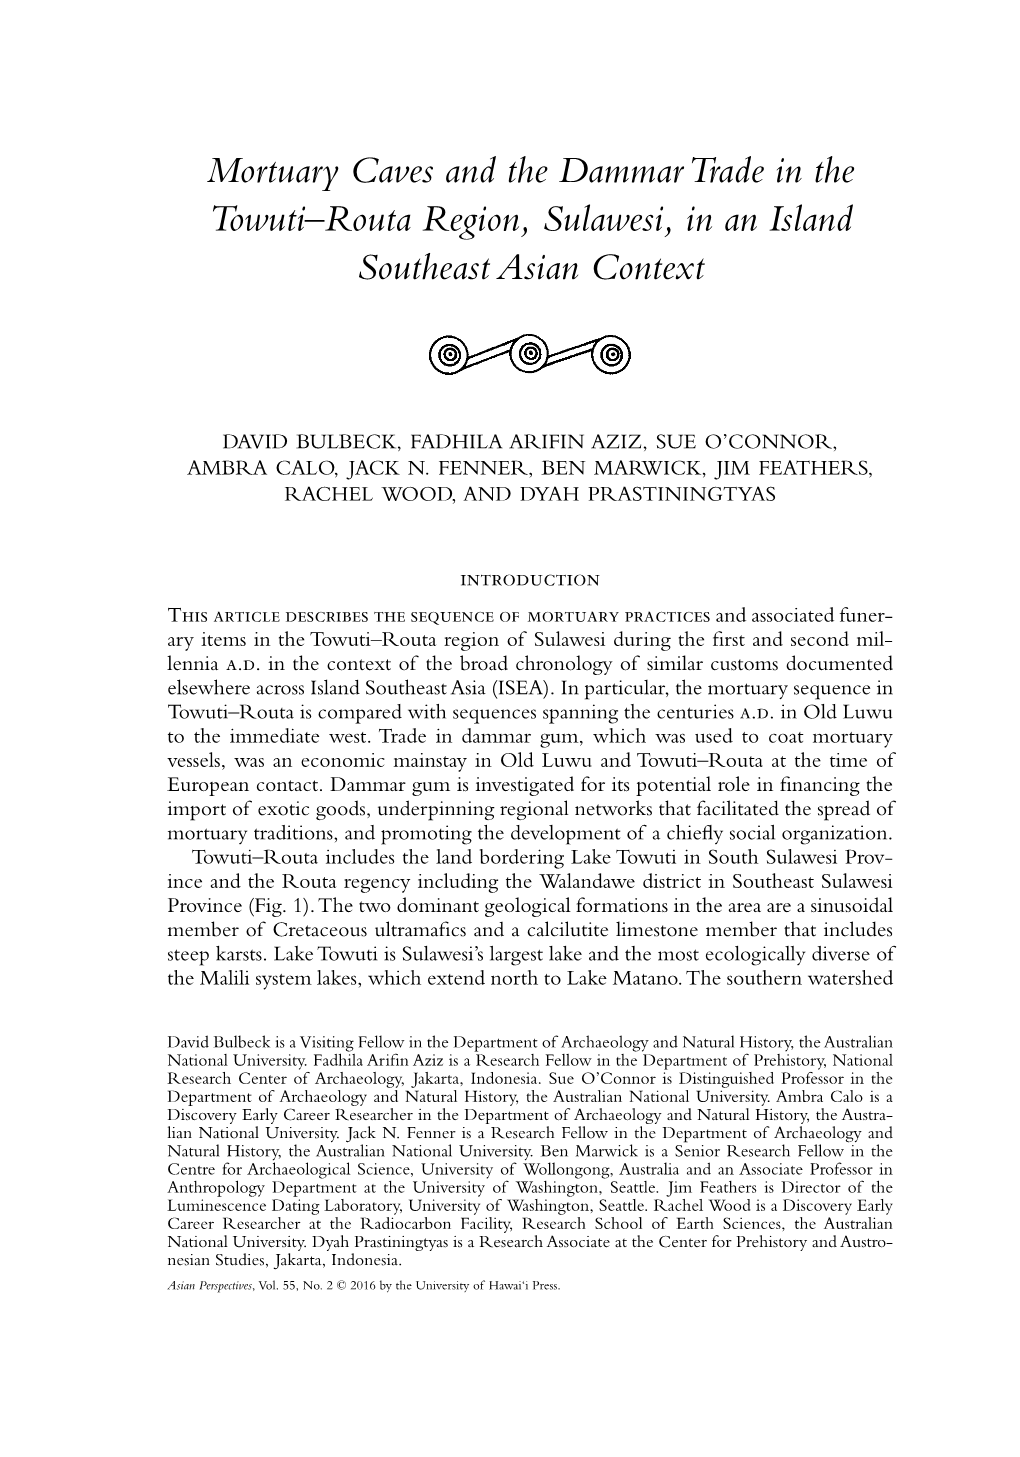 Mortuary Caves and the Dammar Trade in the Towuti–Routa Region, Sulawesi, in an Island Southeast Asian Context